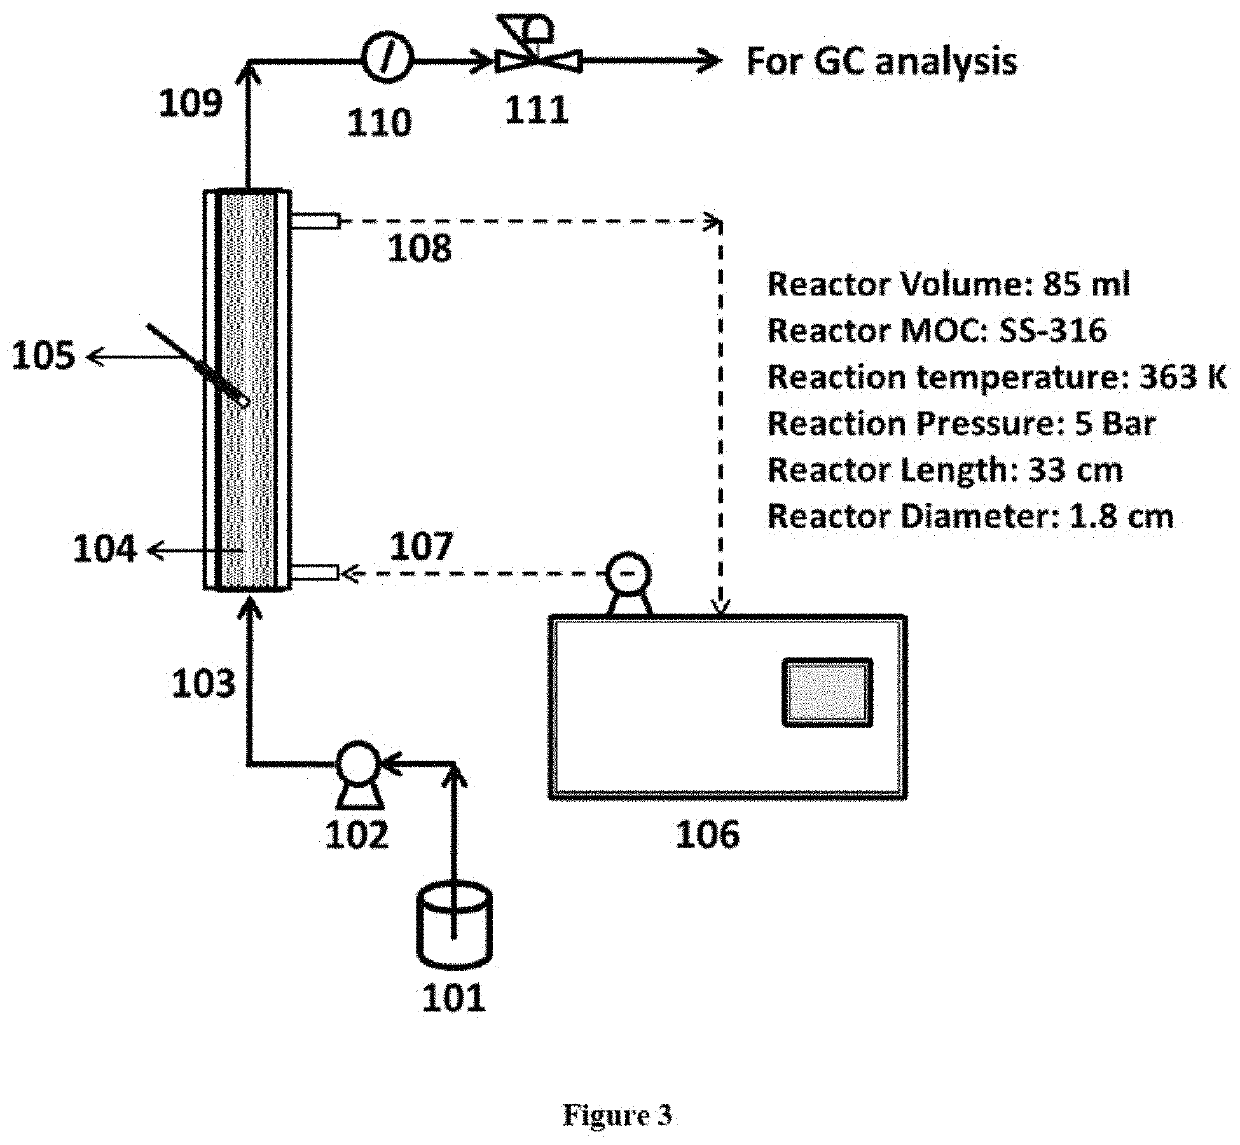 Continuous production of methyl pentenone using cation exchange resin in a fixed bed reactor